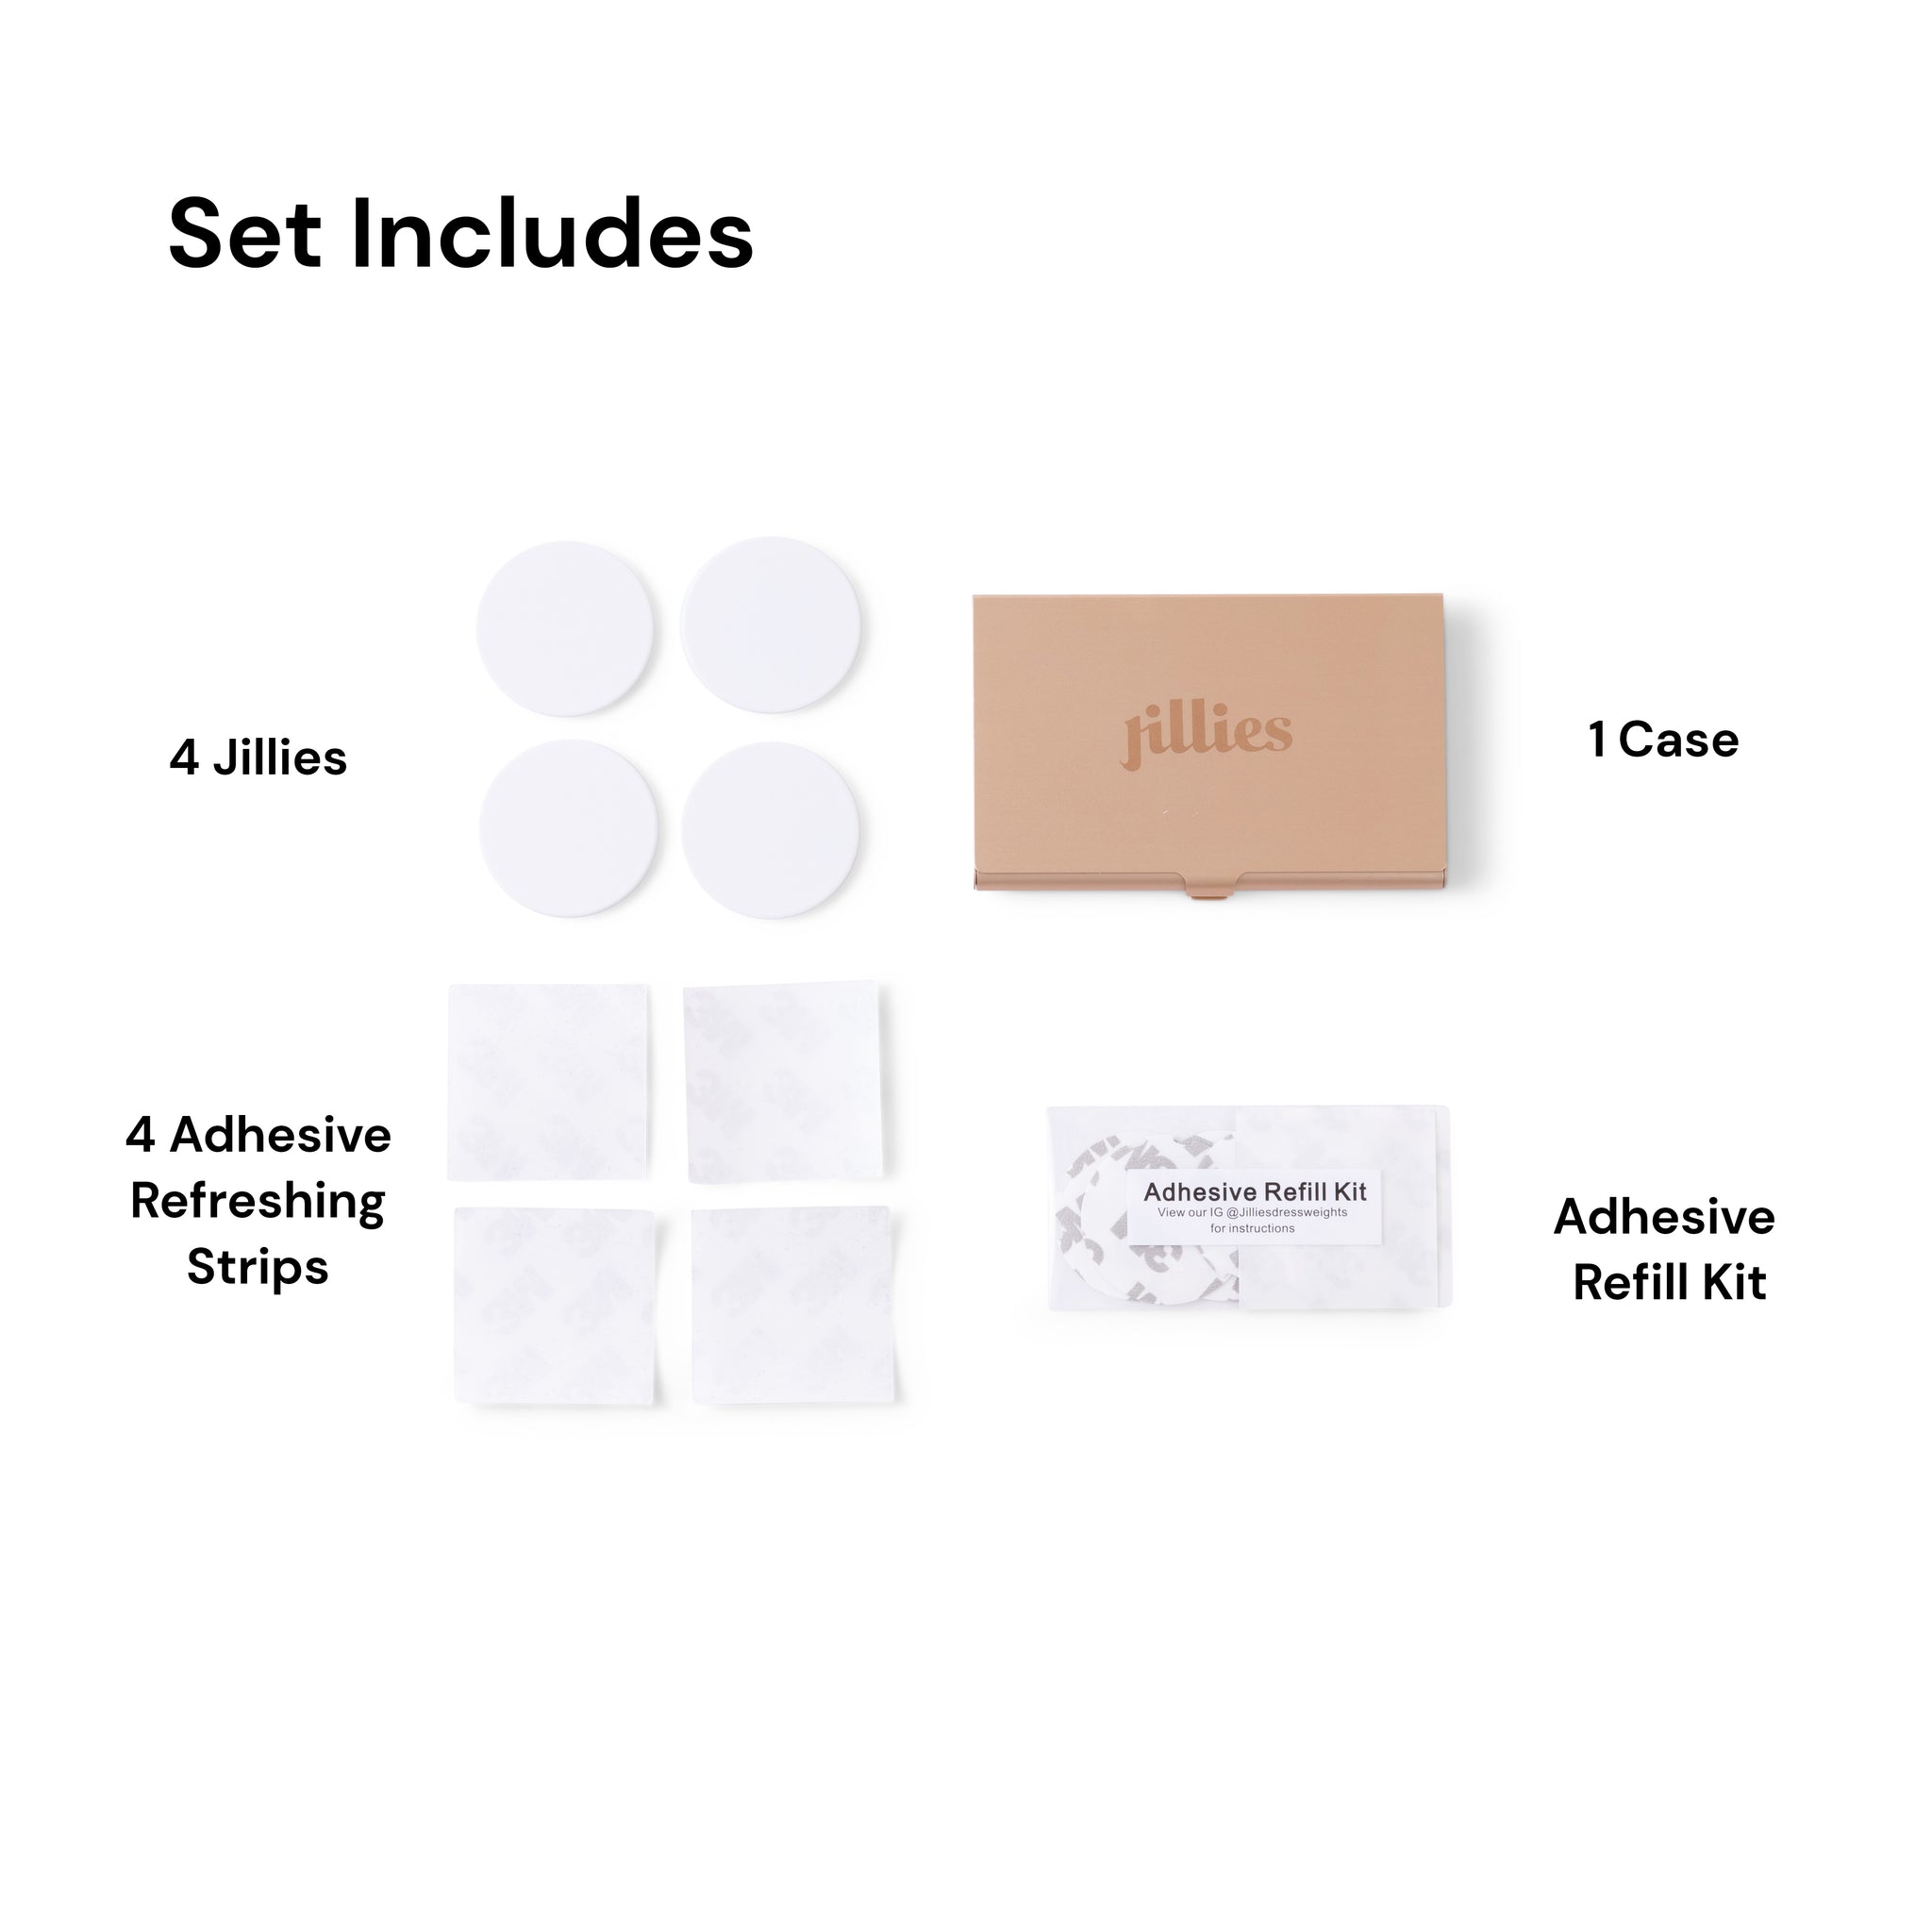 The 3-Pack Bundle - Get more Jillies for 15% off